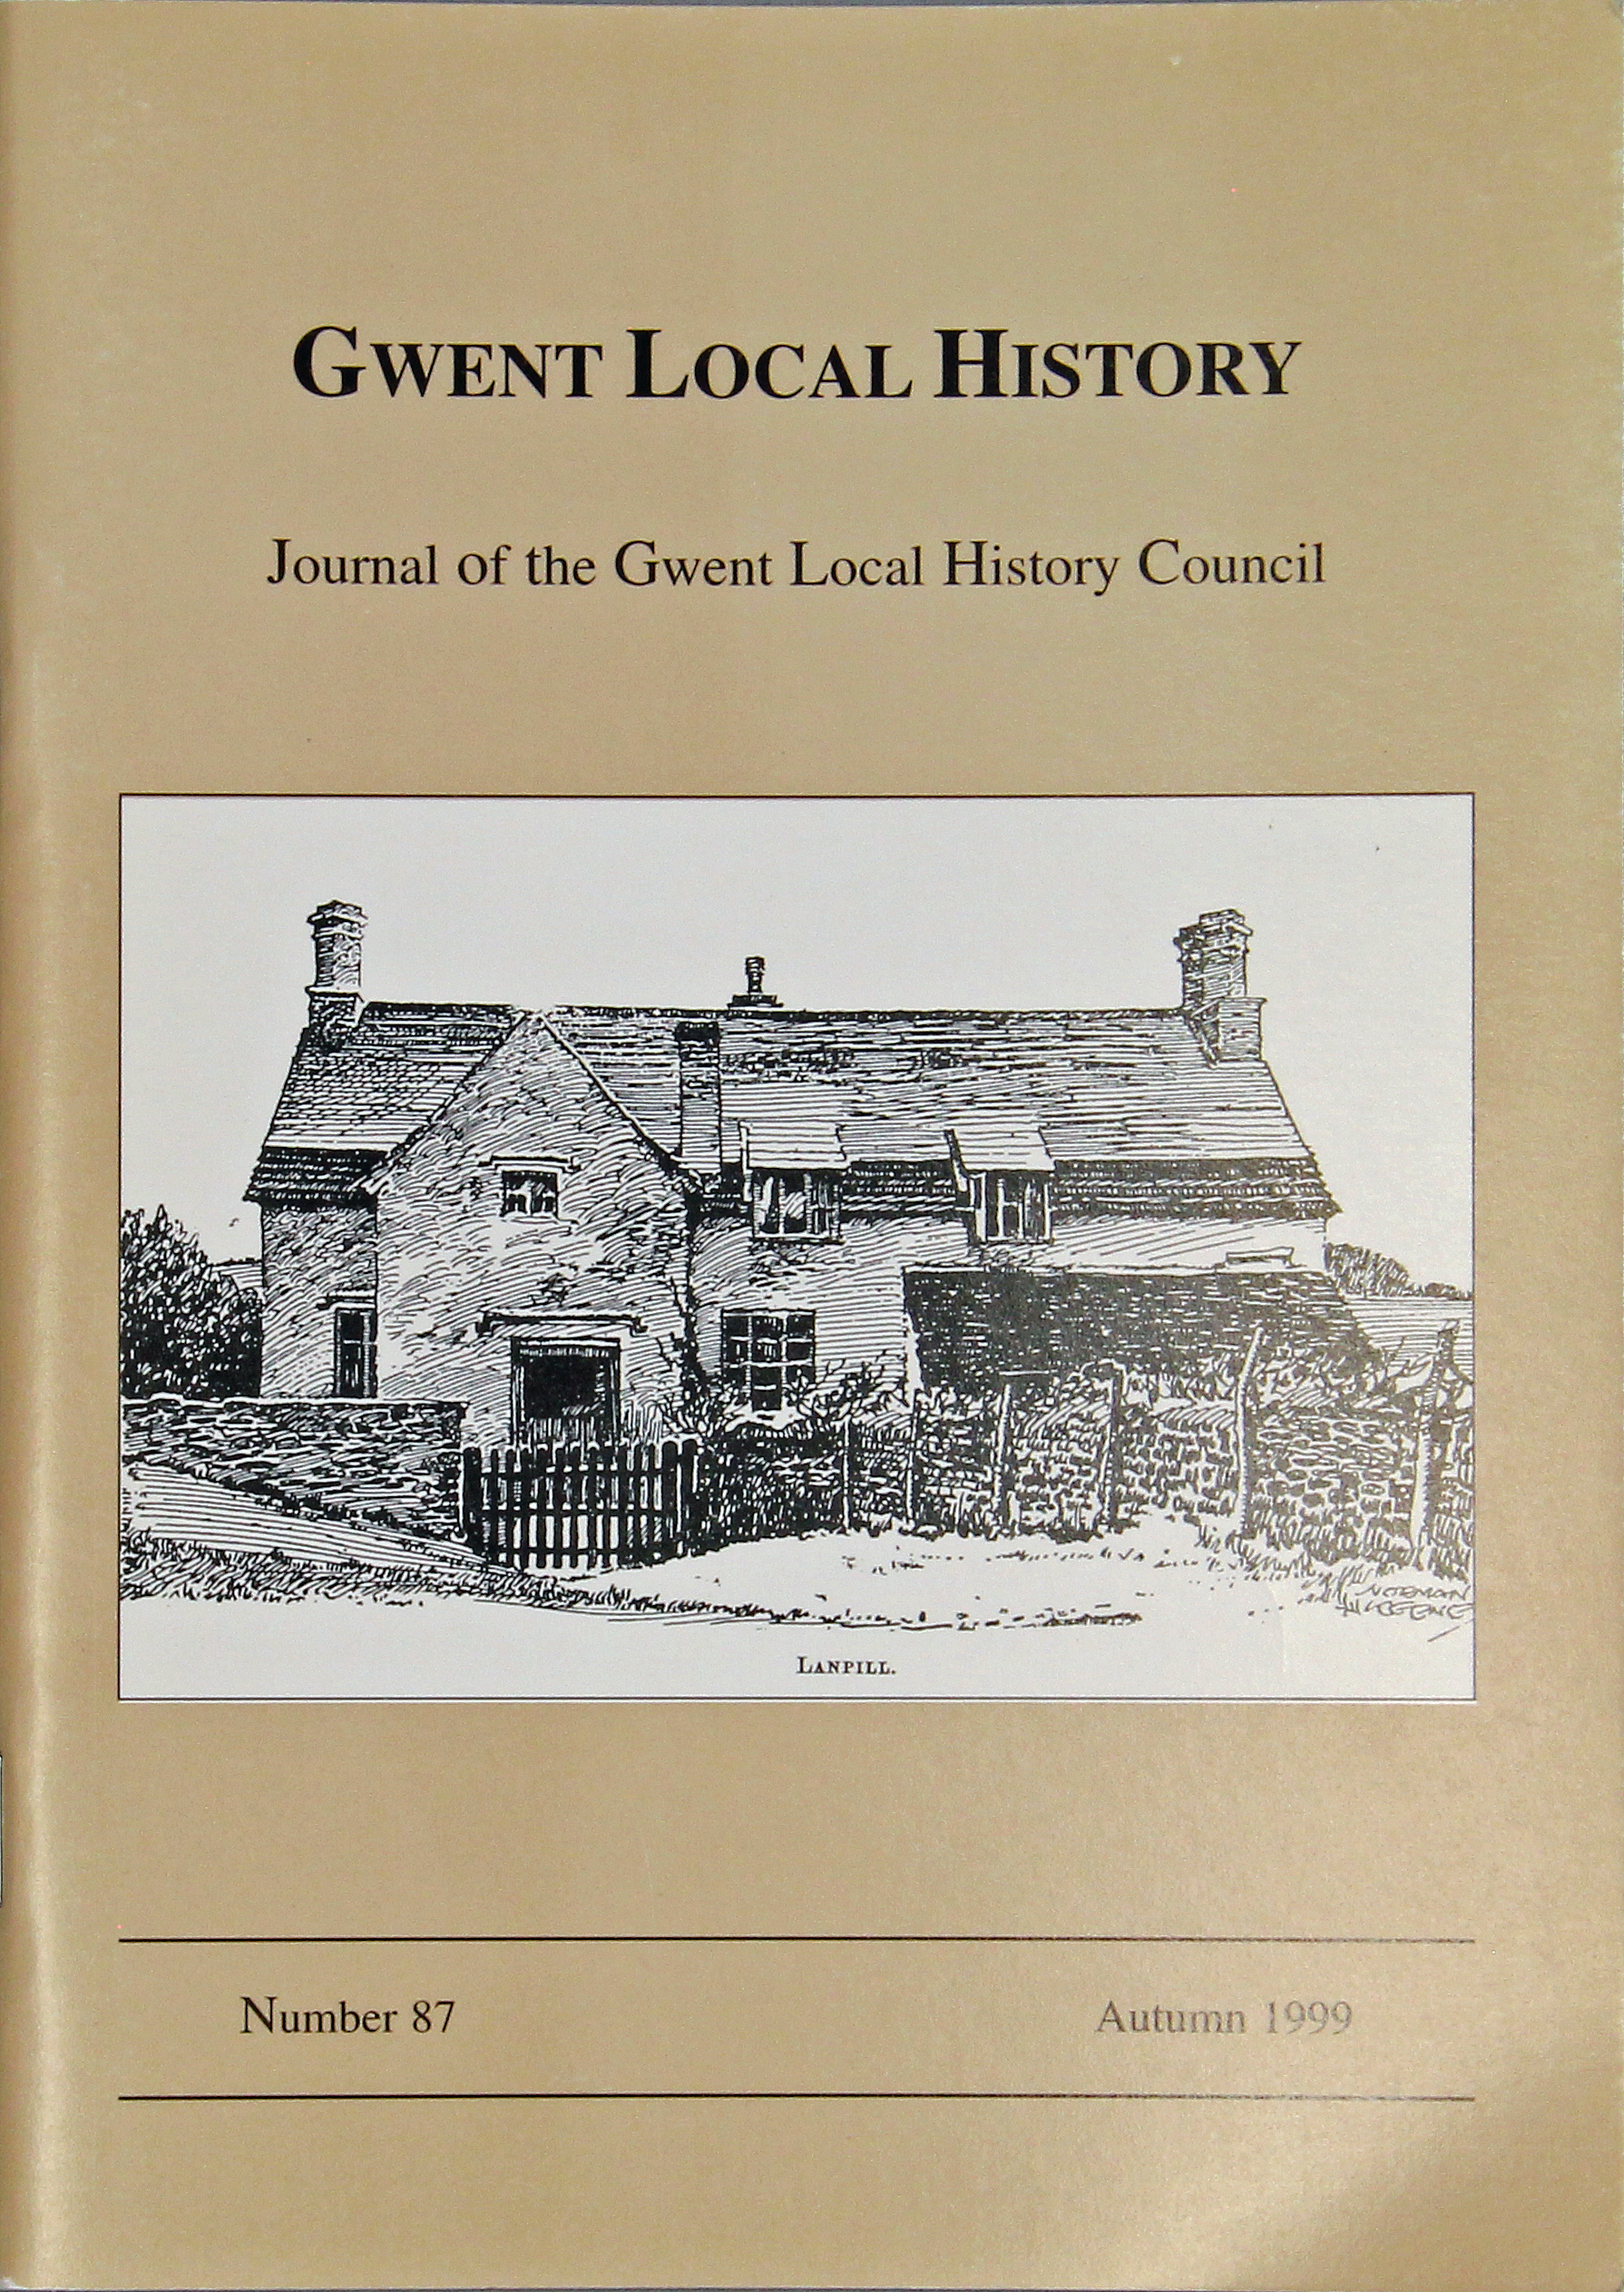 Gwent Local History: Journal of the Gwent Local History Council No.87, Autumn 1999, £2.00